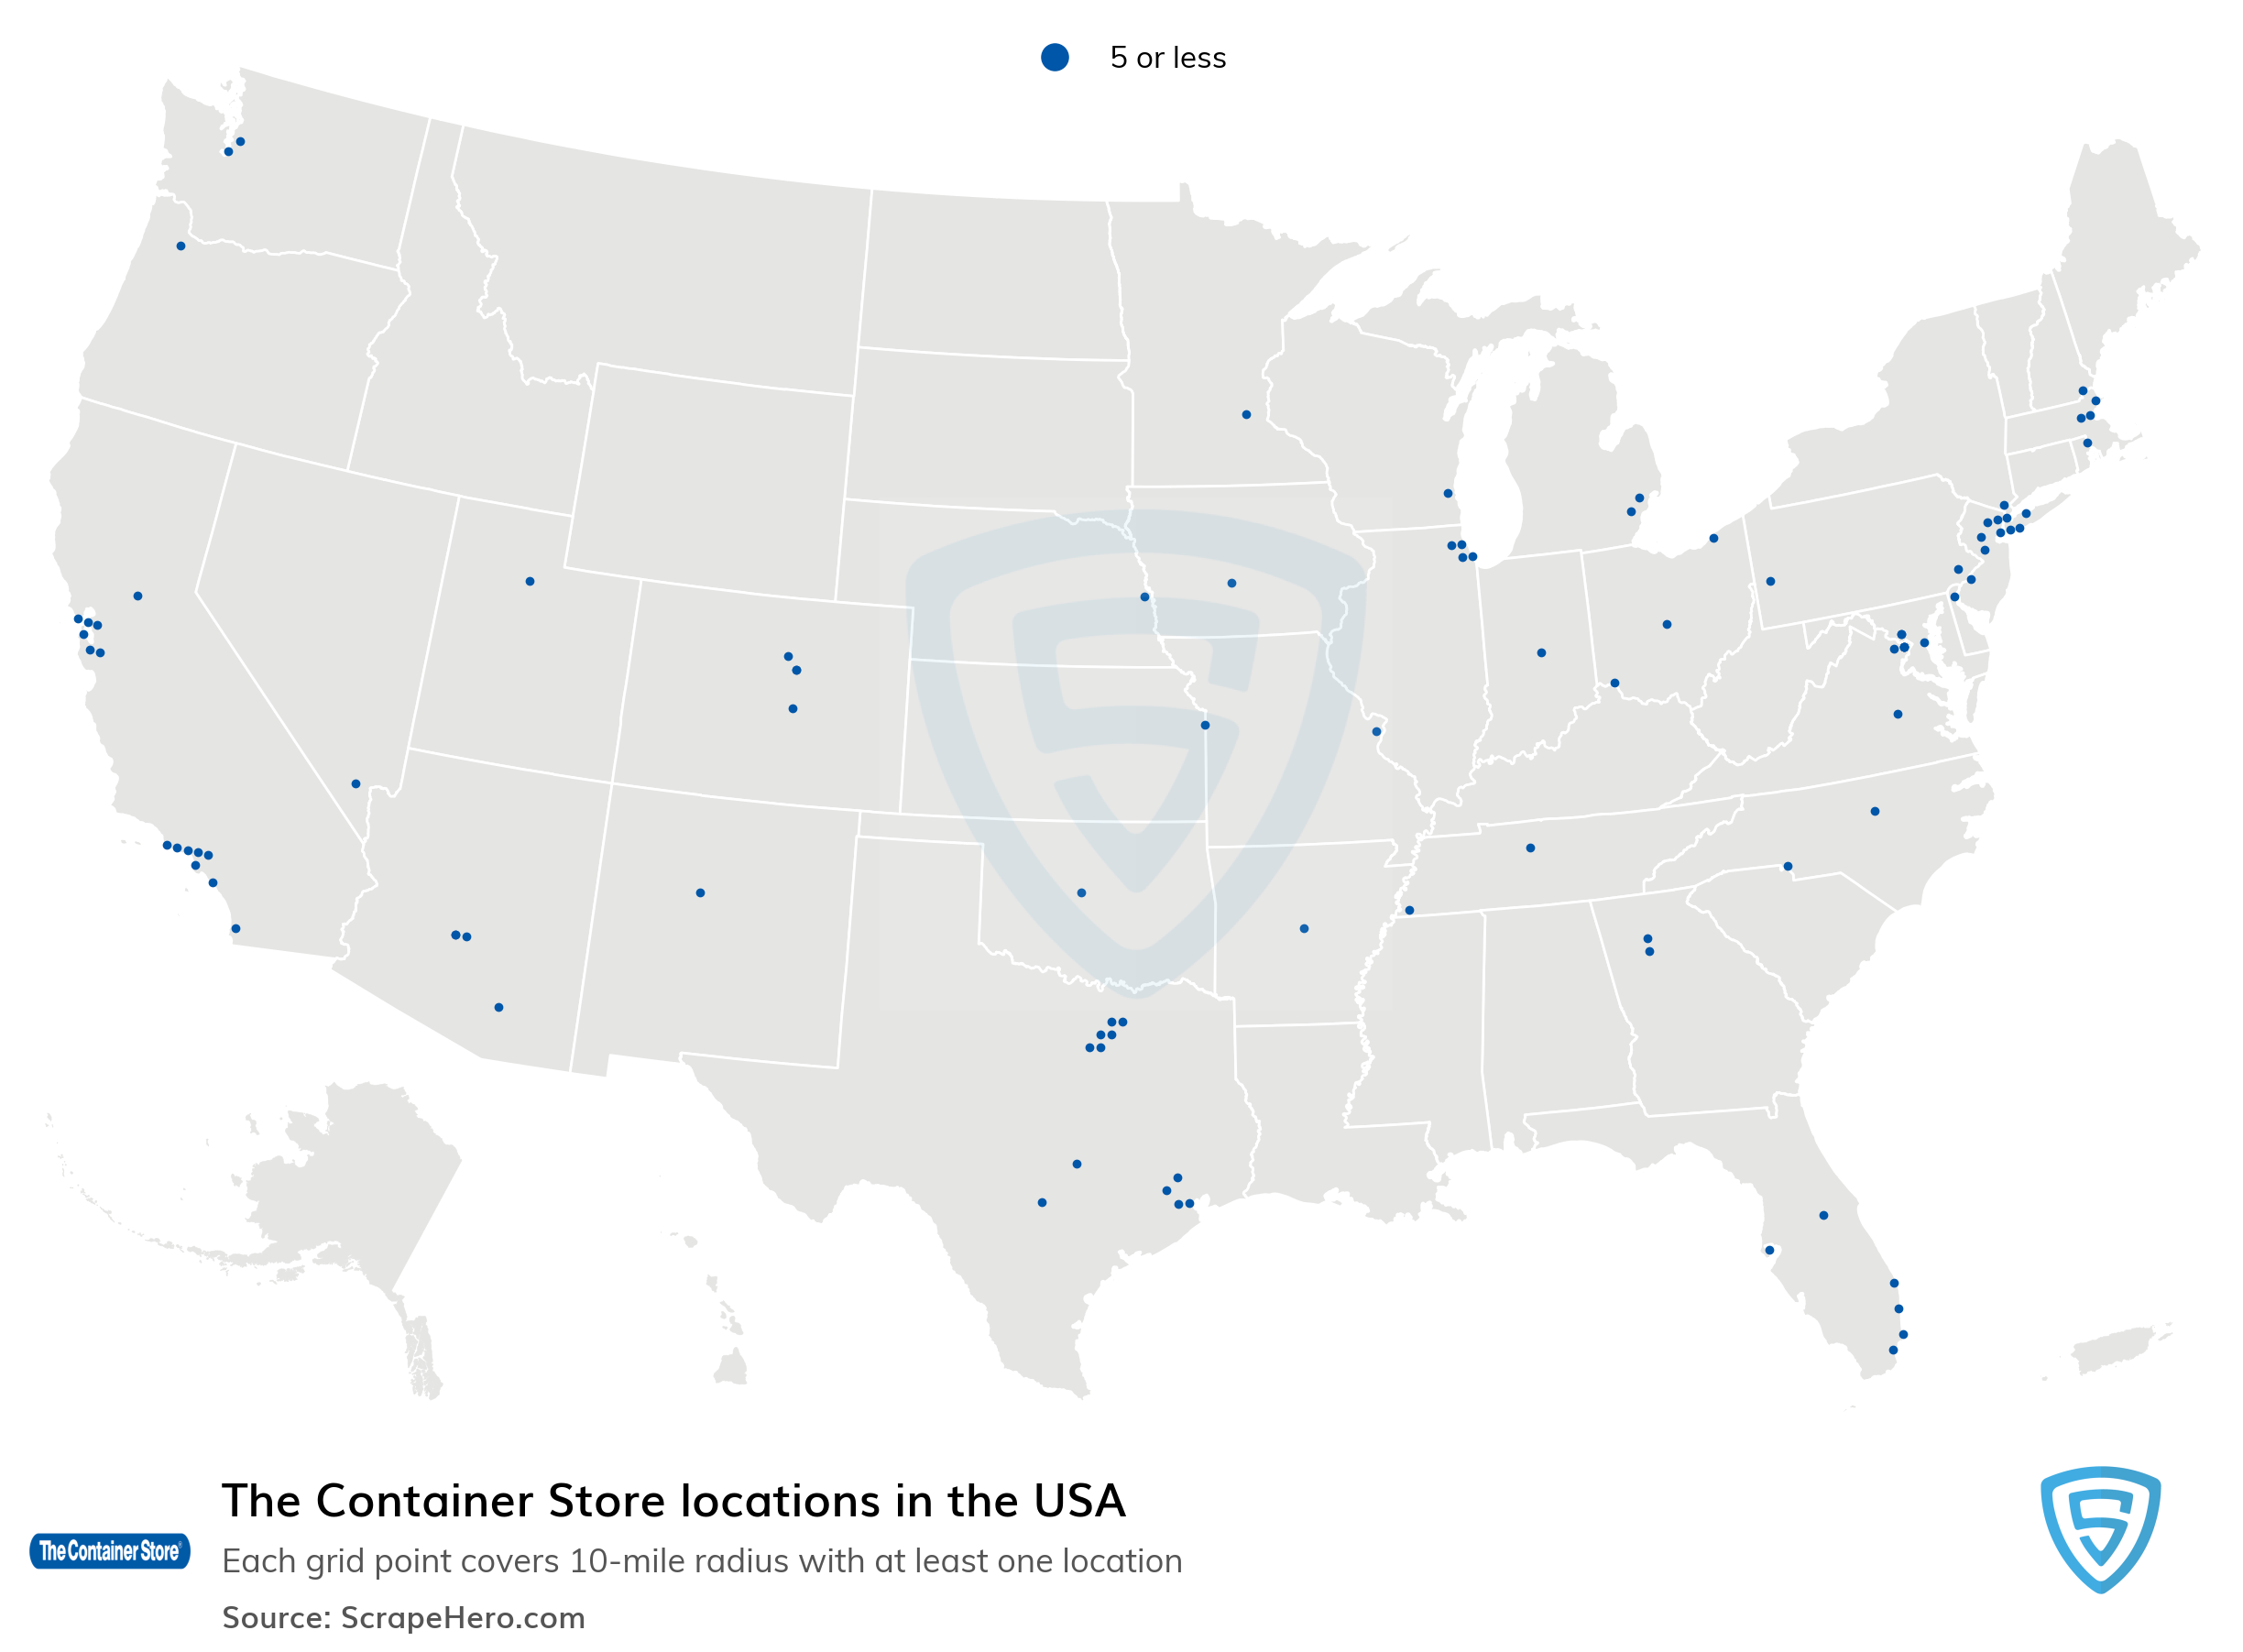 https://www.scrapehero.com/store/wp-content/uploads/maps/The_Container_Store_USA.png